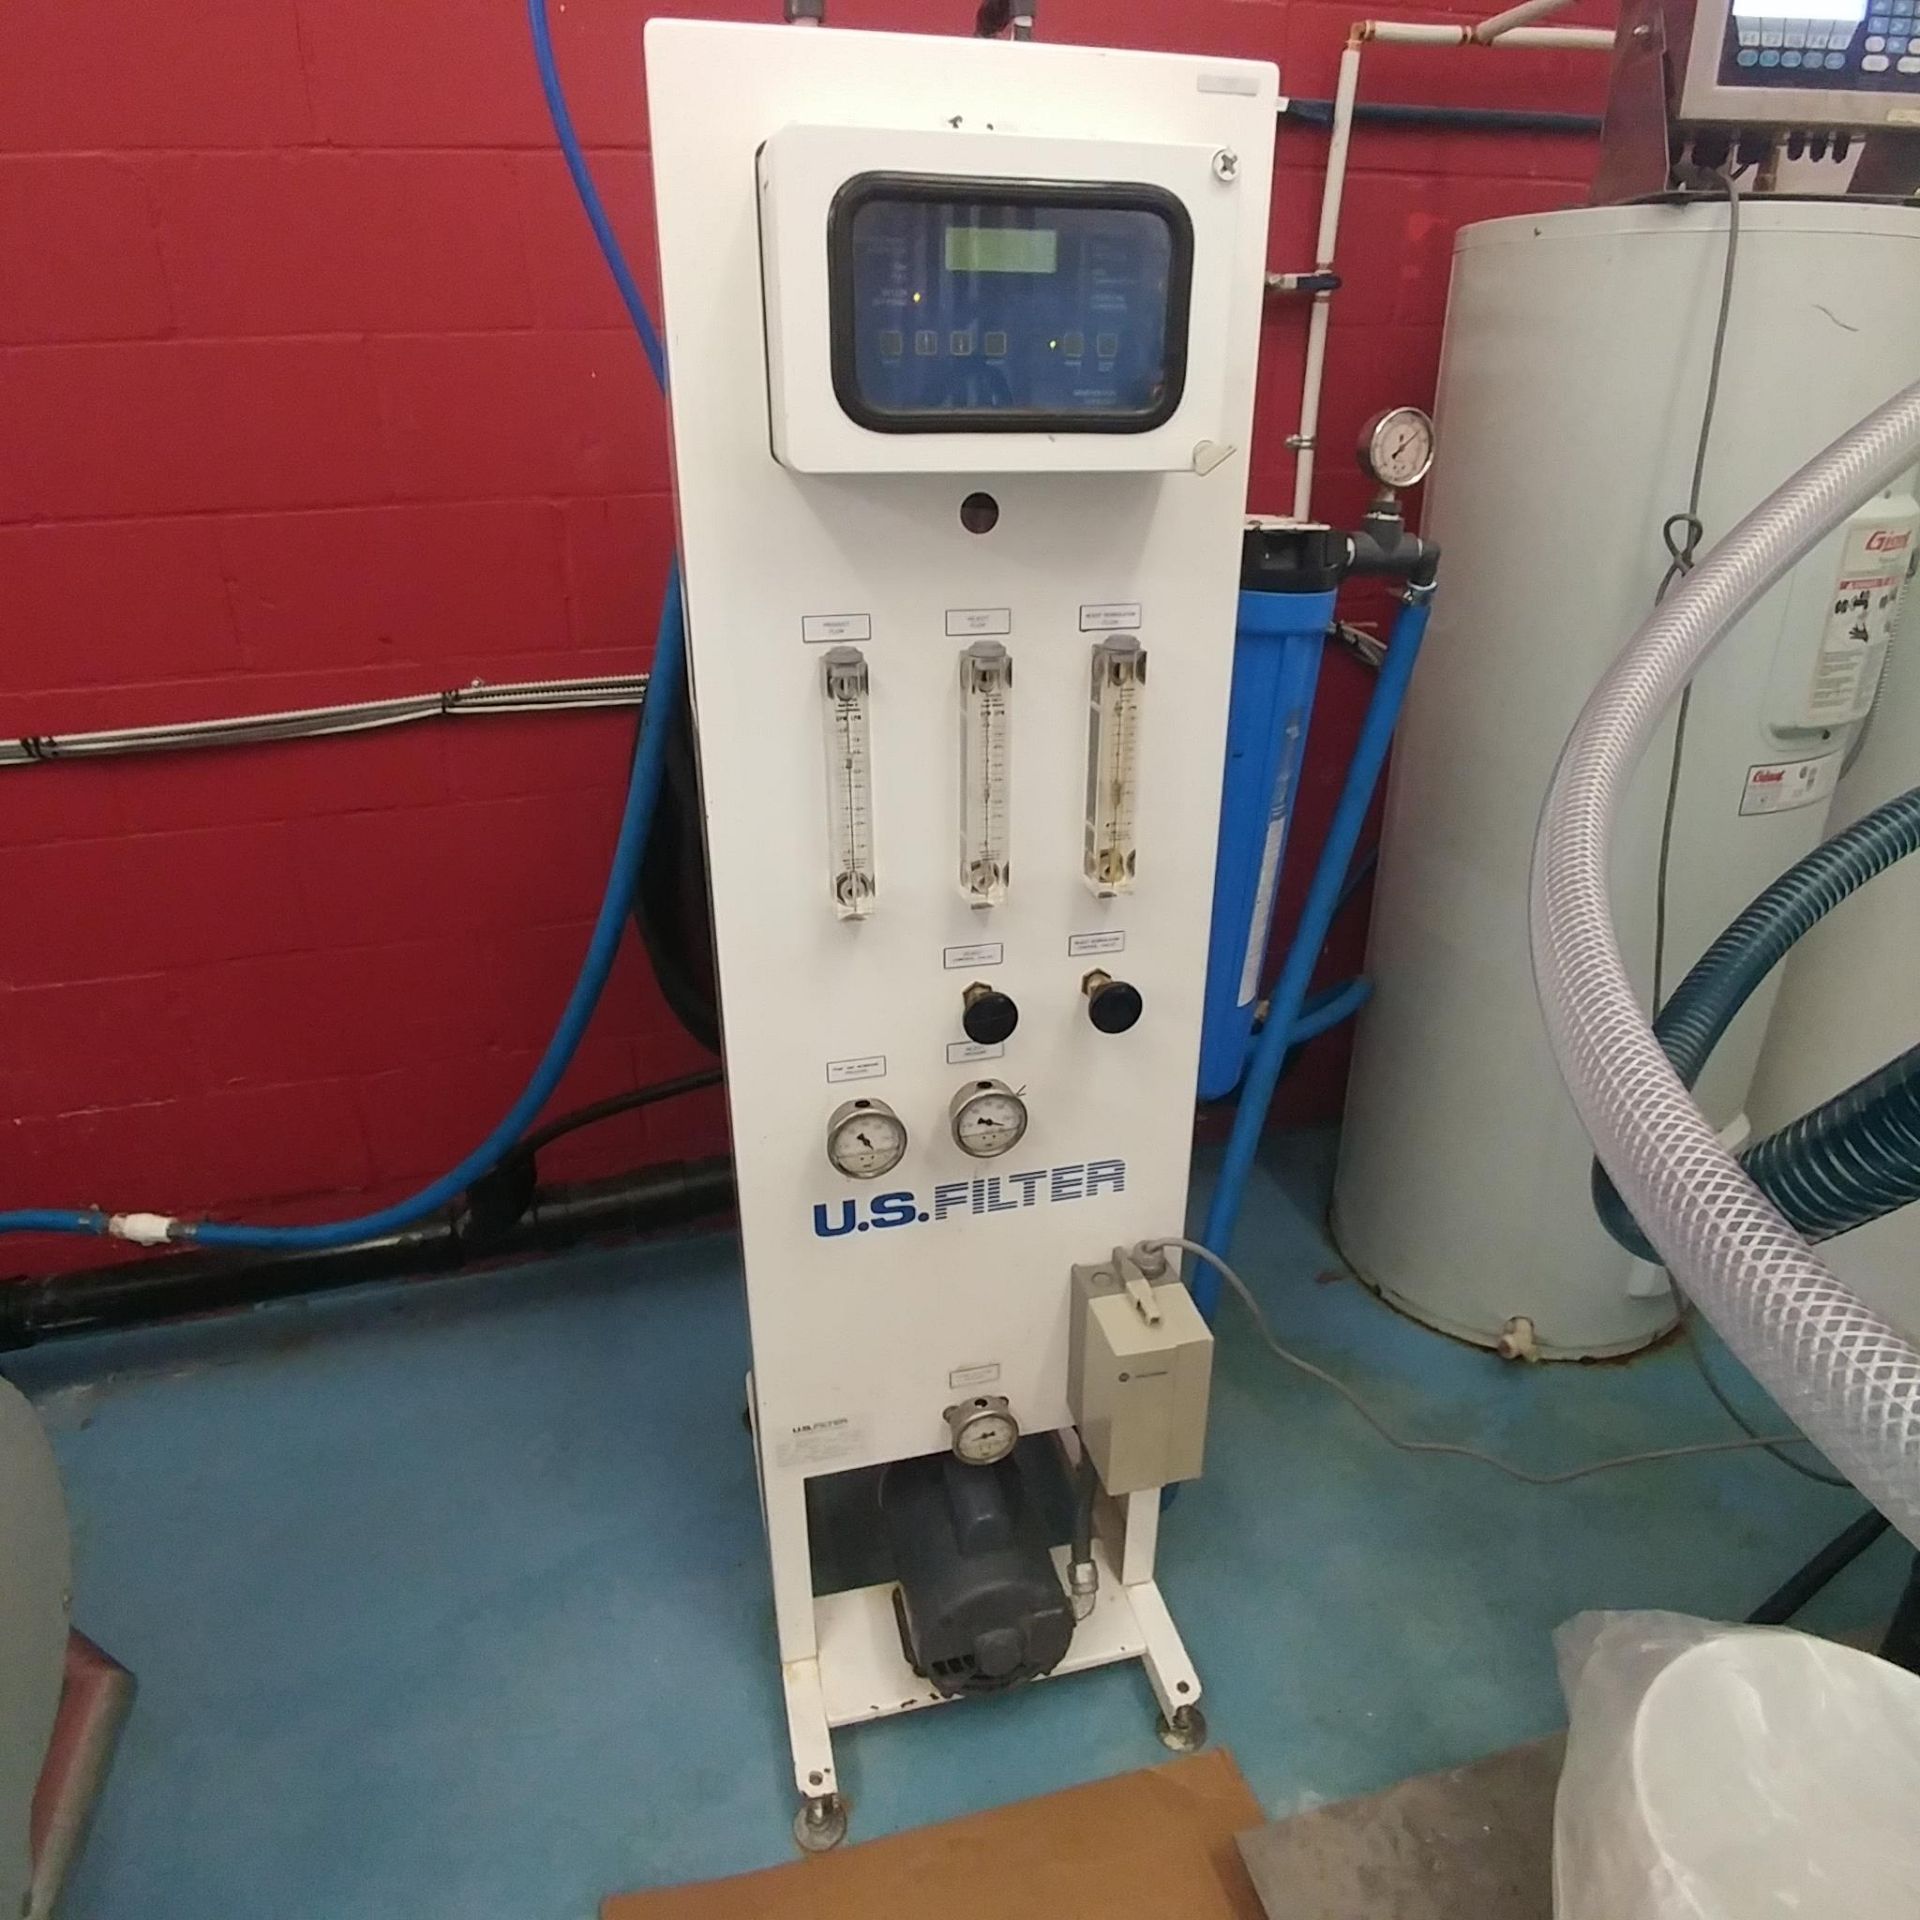 US Filter Reverse Osmosis water system with control panel 115V **See Auctioneers Note**